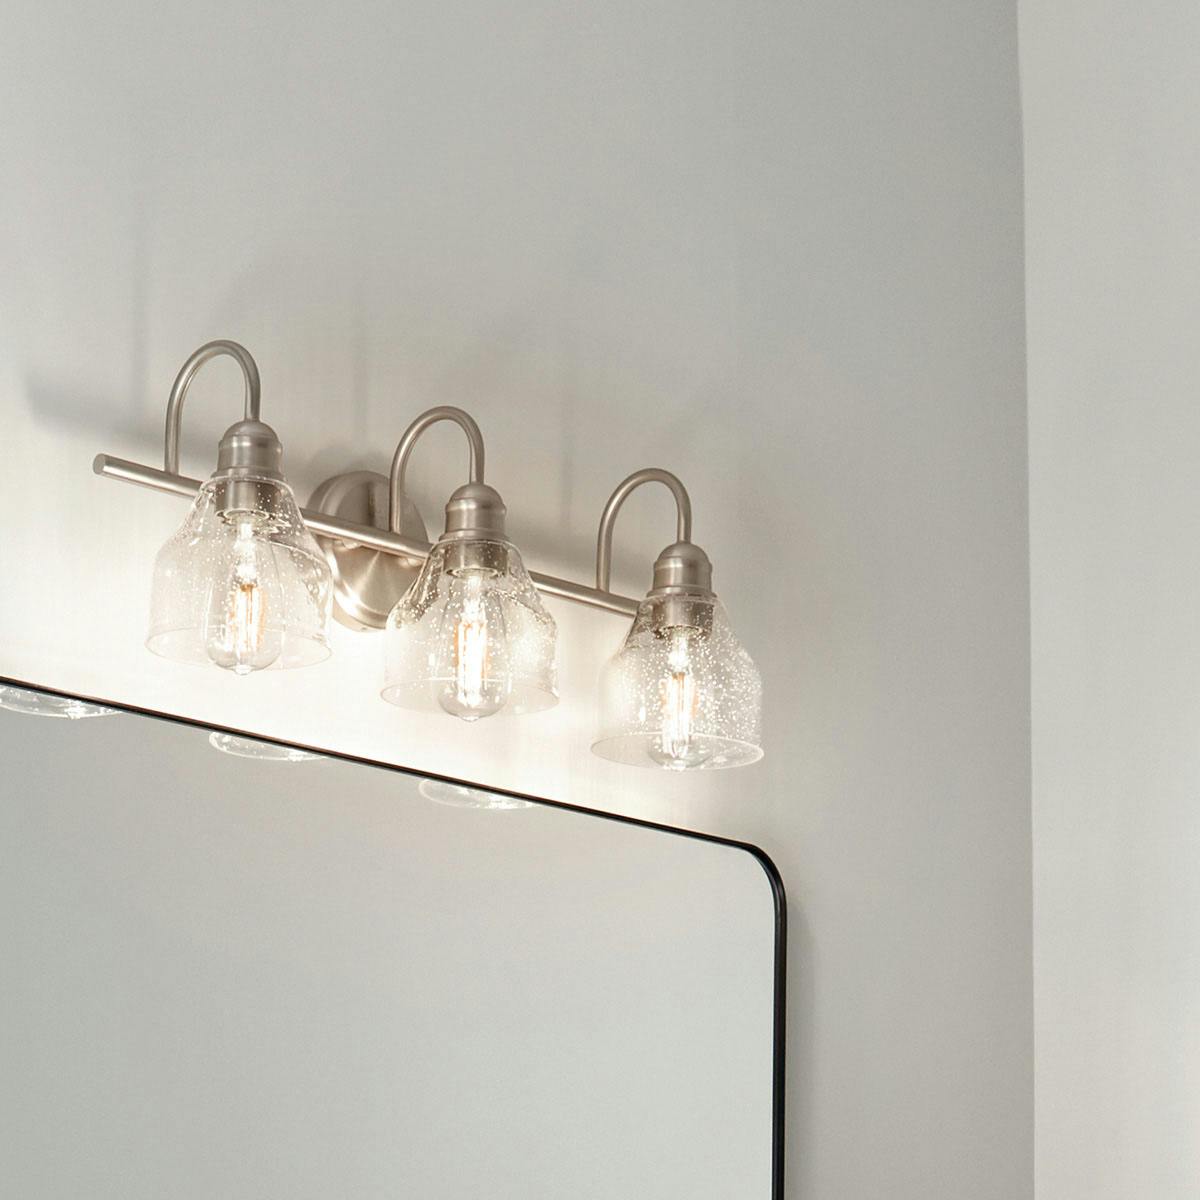 Day time Bathroom featuring Avery vanity light 45973NI